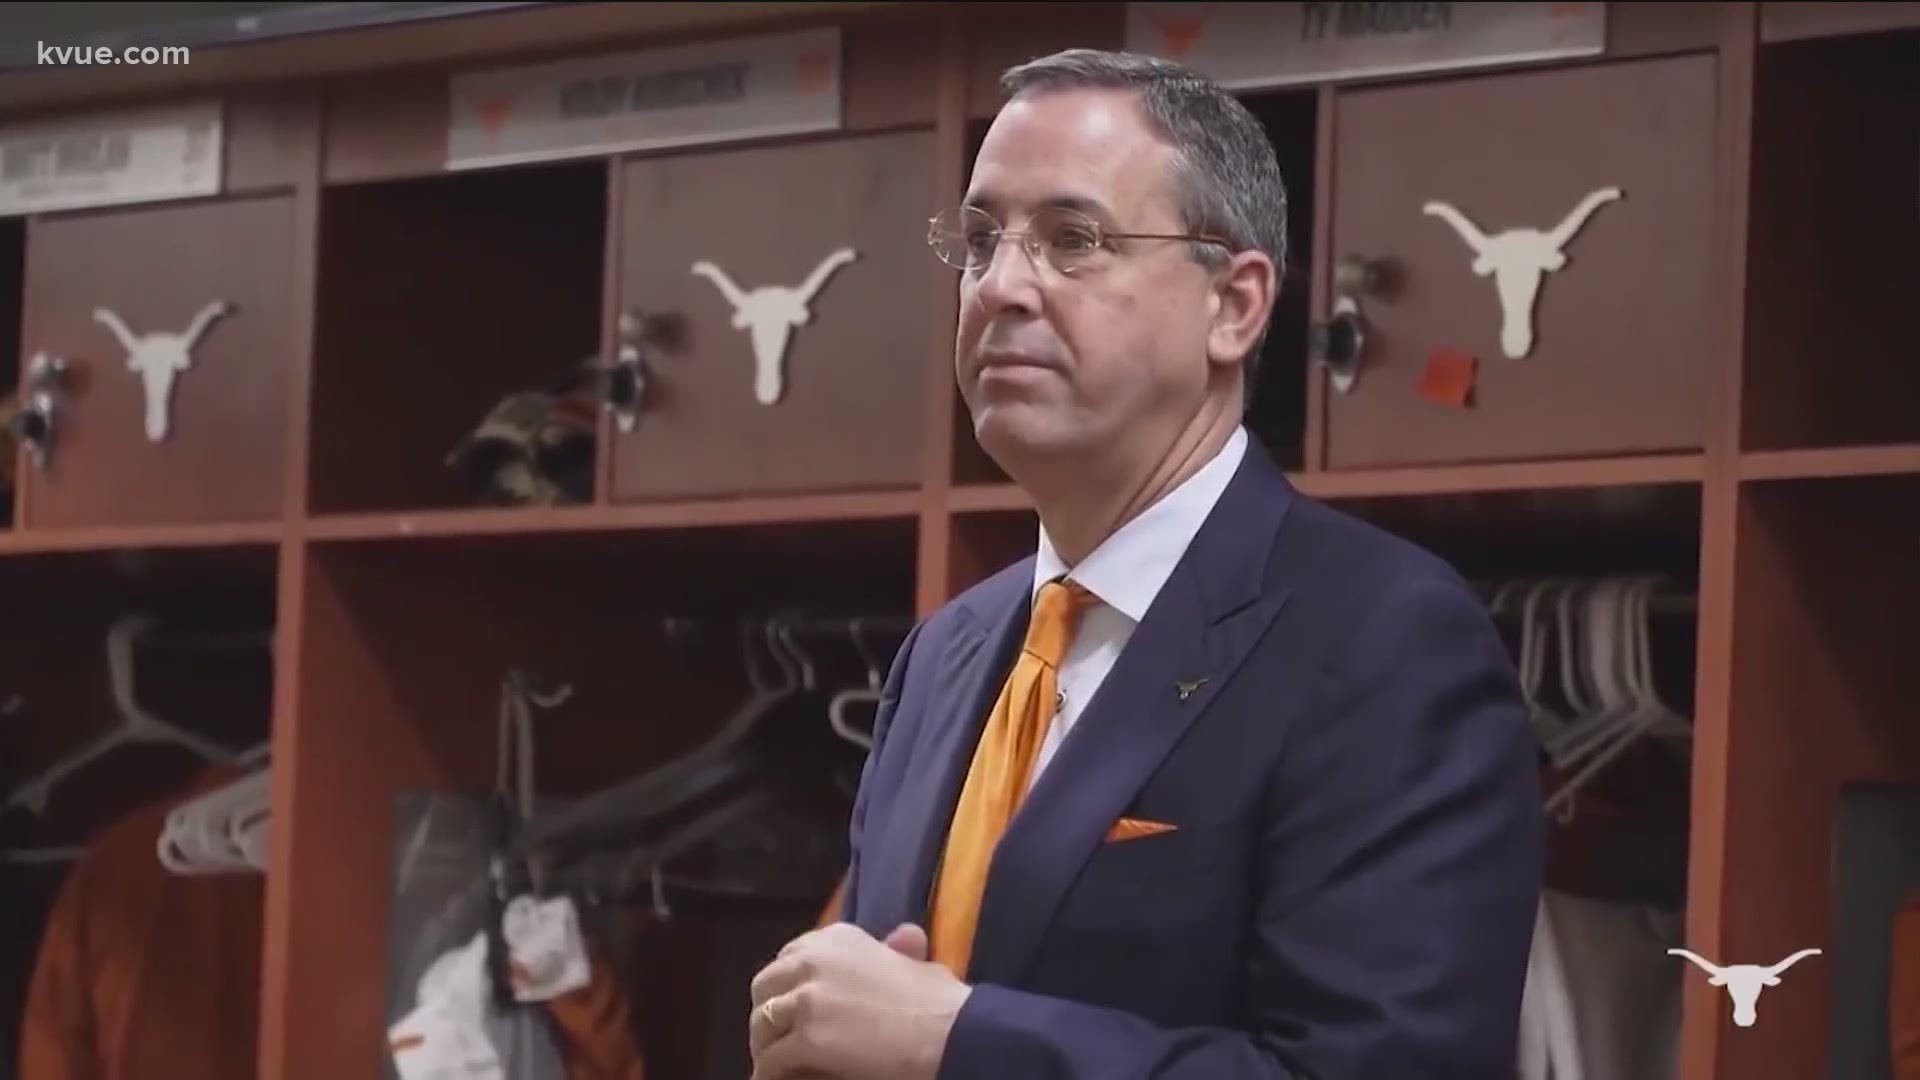 The University of Texas athletics department announced $13.1 million in cuts due to the effects of COVID-19. Jeff Jones breaks down that number.